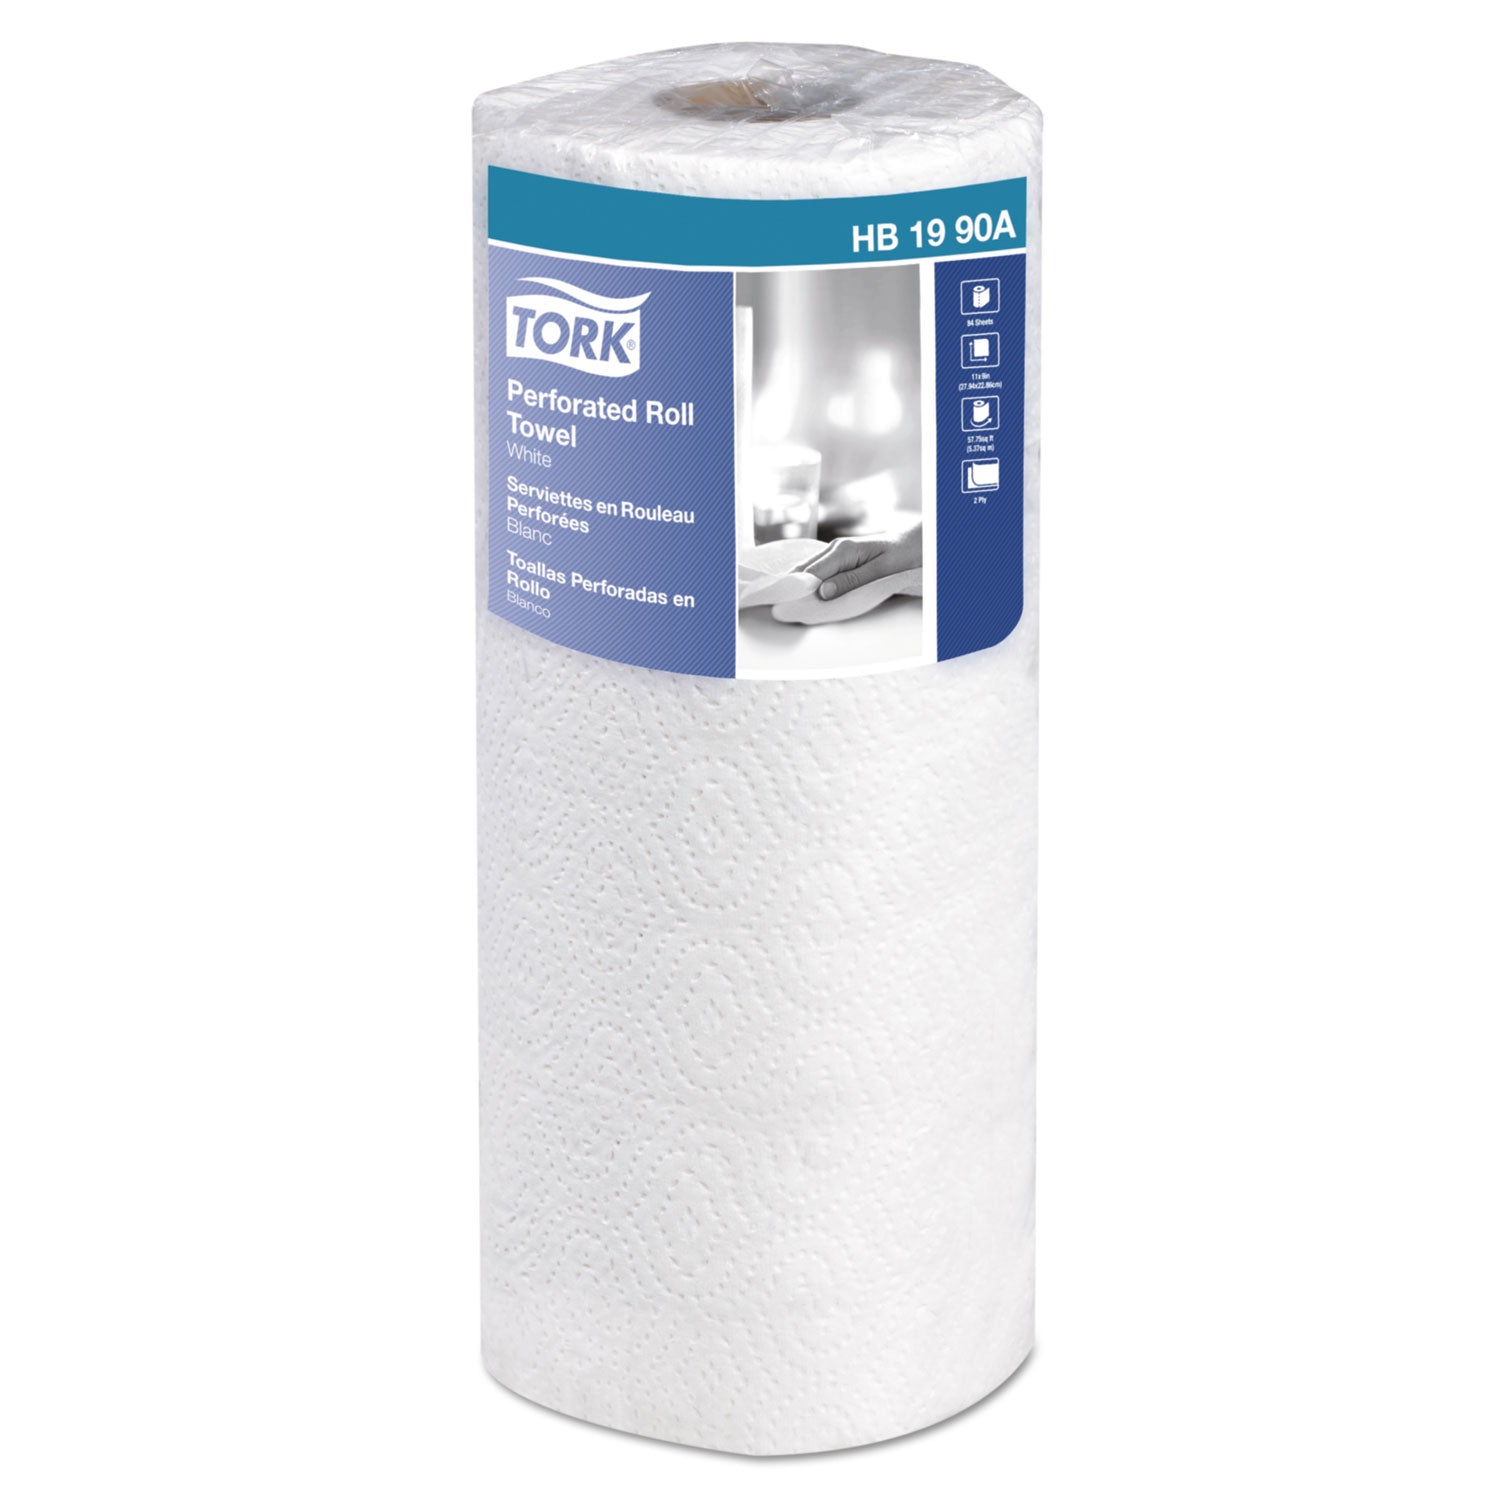 universal-perforated-kitchen-towel-roll-2-ply-11-x-9-white-84-roll-30-rolls-carton_trkhb1990a - 1